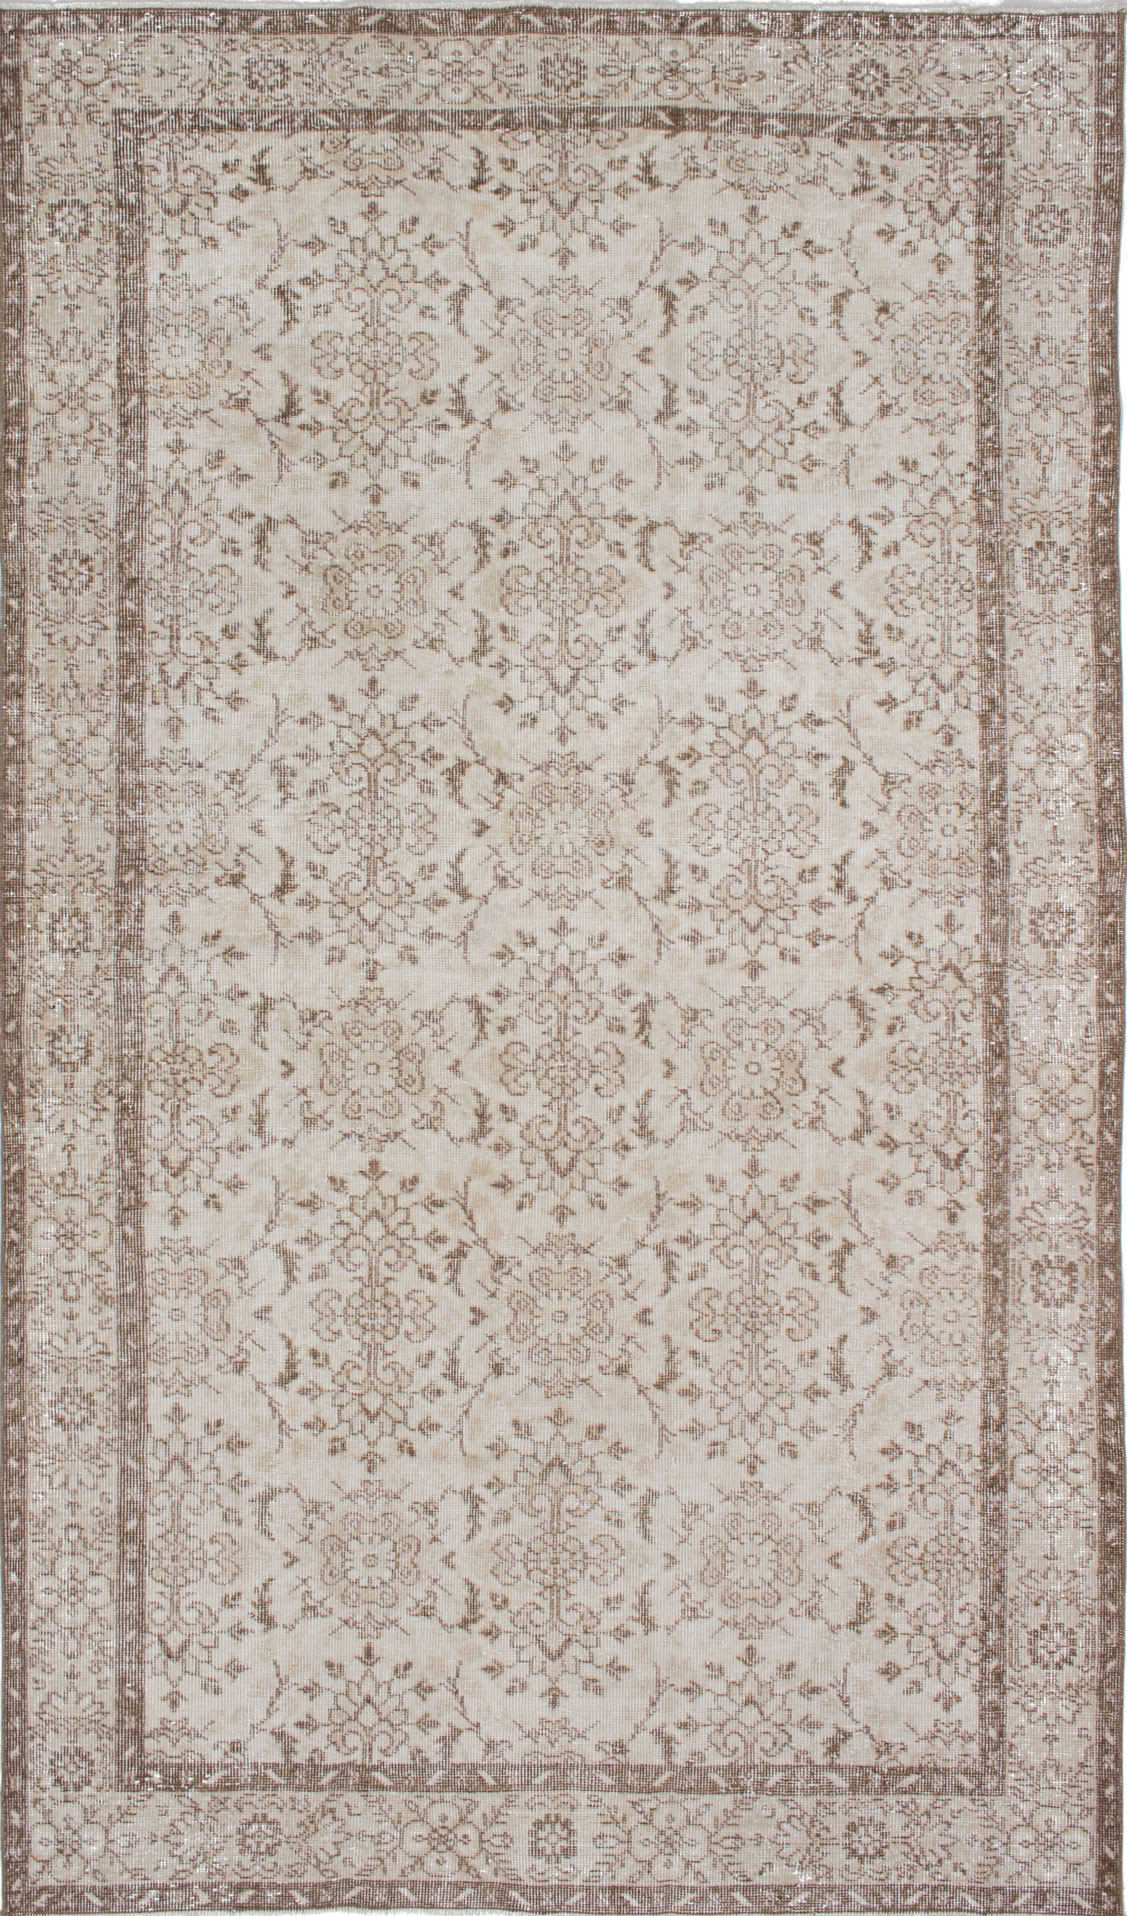 Hand-knotted Melis Vintage Cream Wool Rug 5'10" x 9'10" Size: 5'10" x 9'10"  